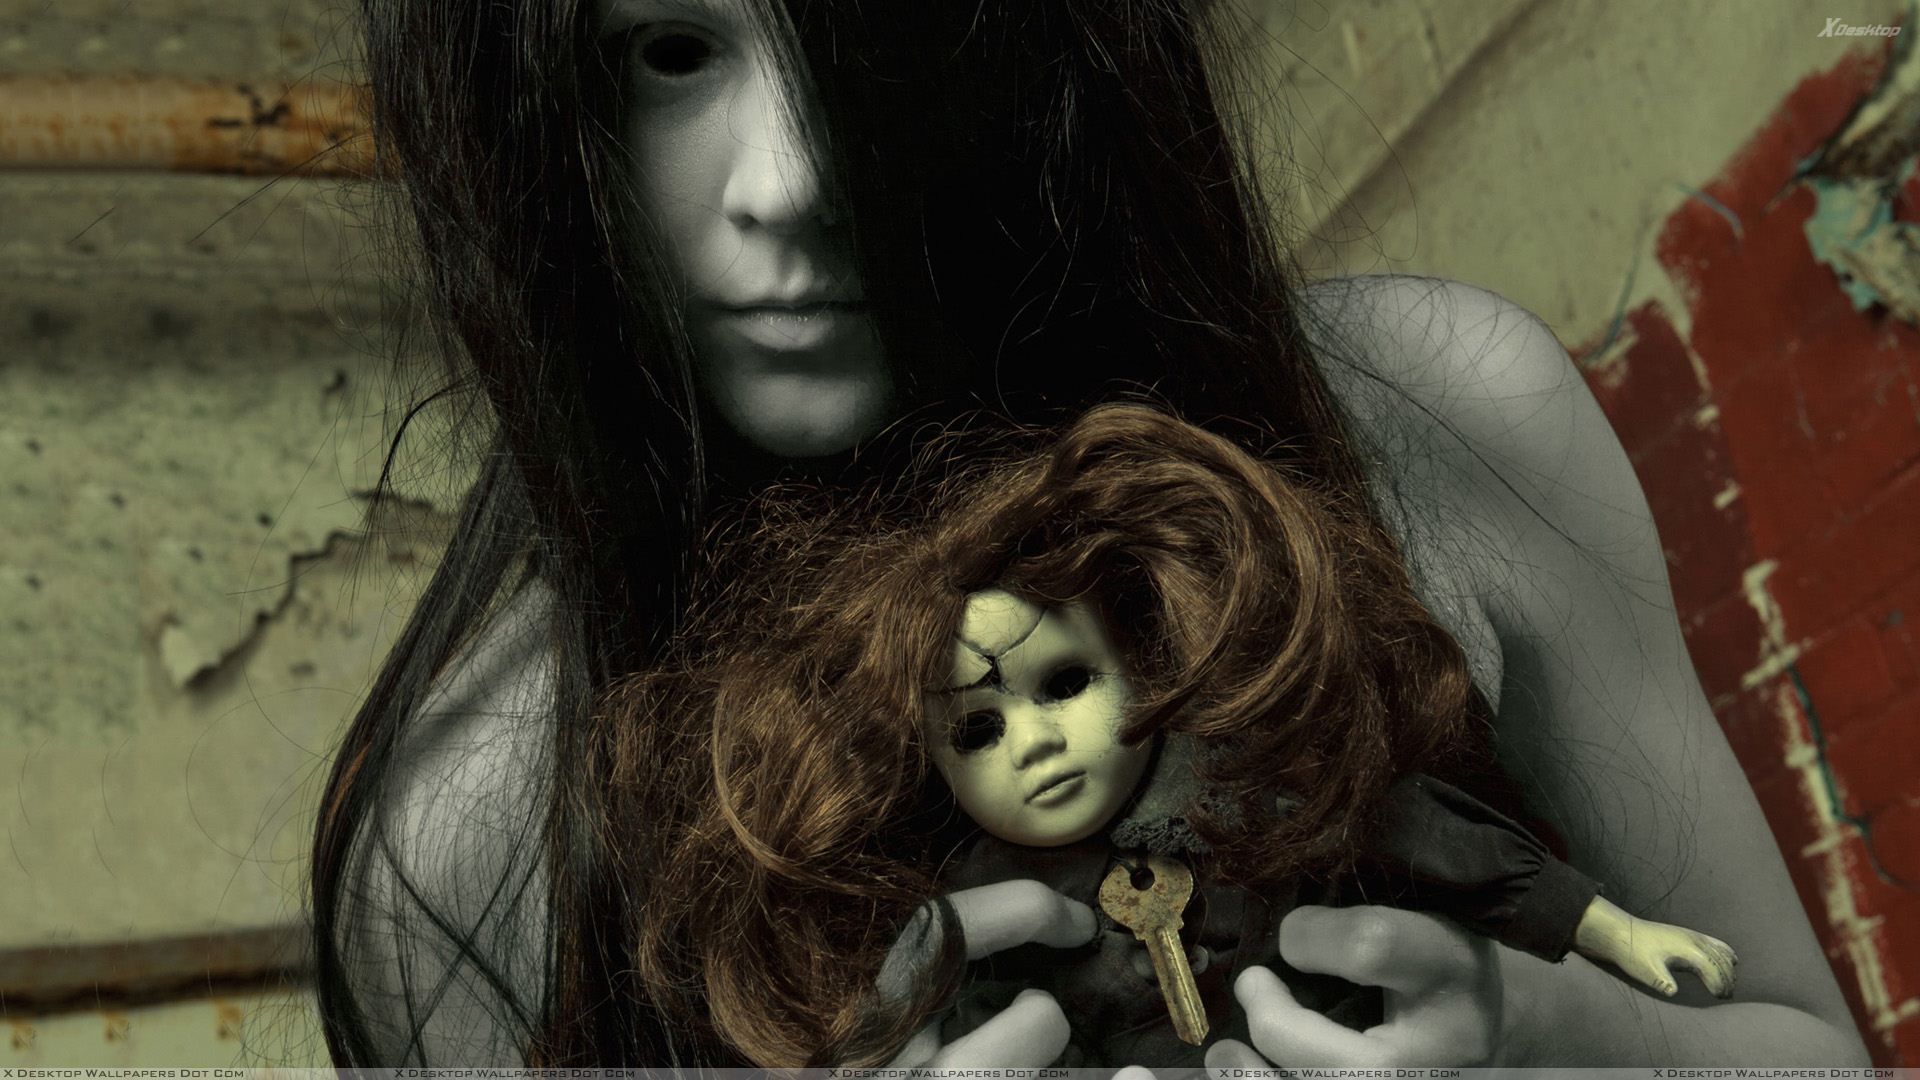 Creepy Ghost Girl With Ghost Barbie. Creepy ghost, Scary wallpaper, Halloween wallpaper background